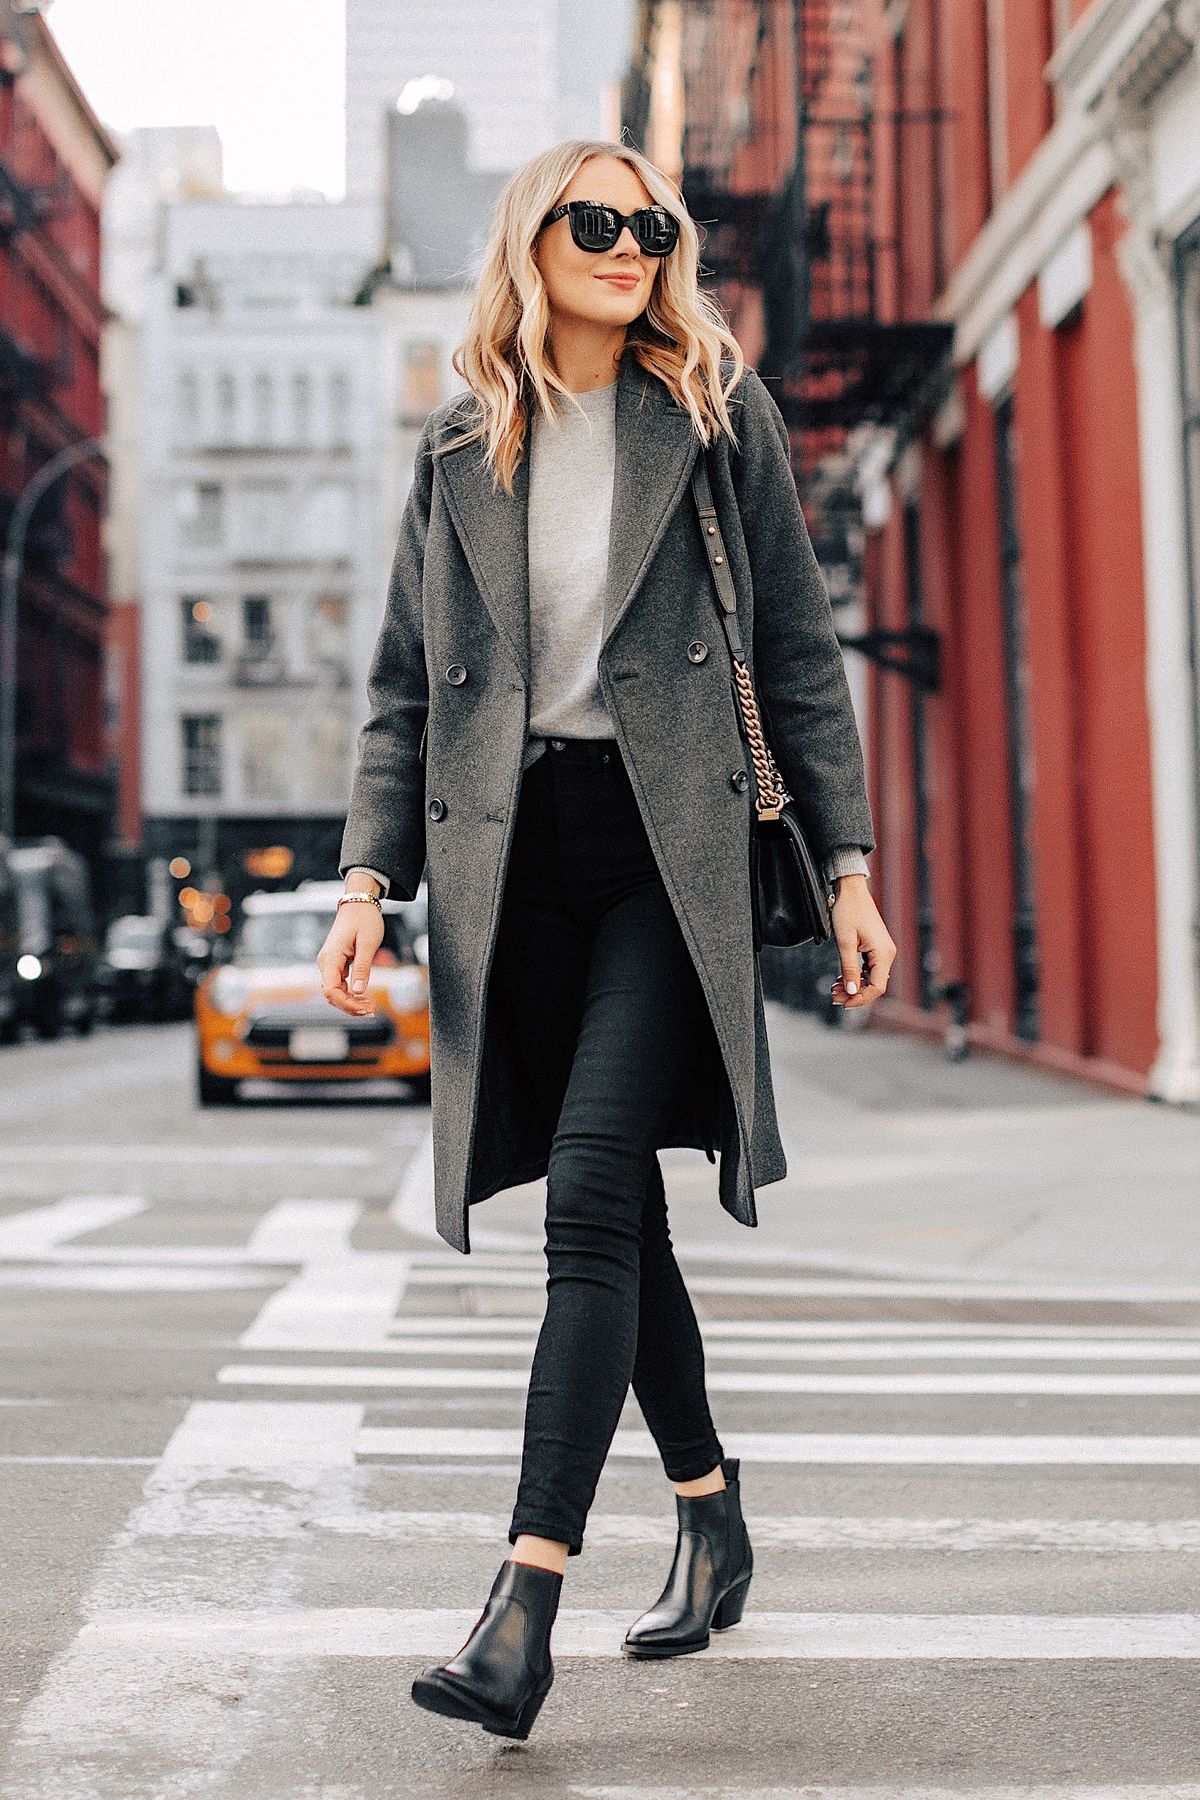 Everlane Winter Outfit in NYC | Fashion Jackson - Everlane Winter Outfit in NYC | Fashion Jackson -   15 style Winter sweater ideas